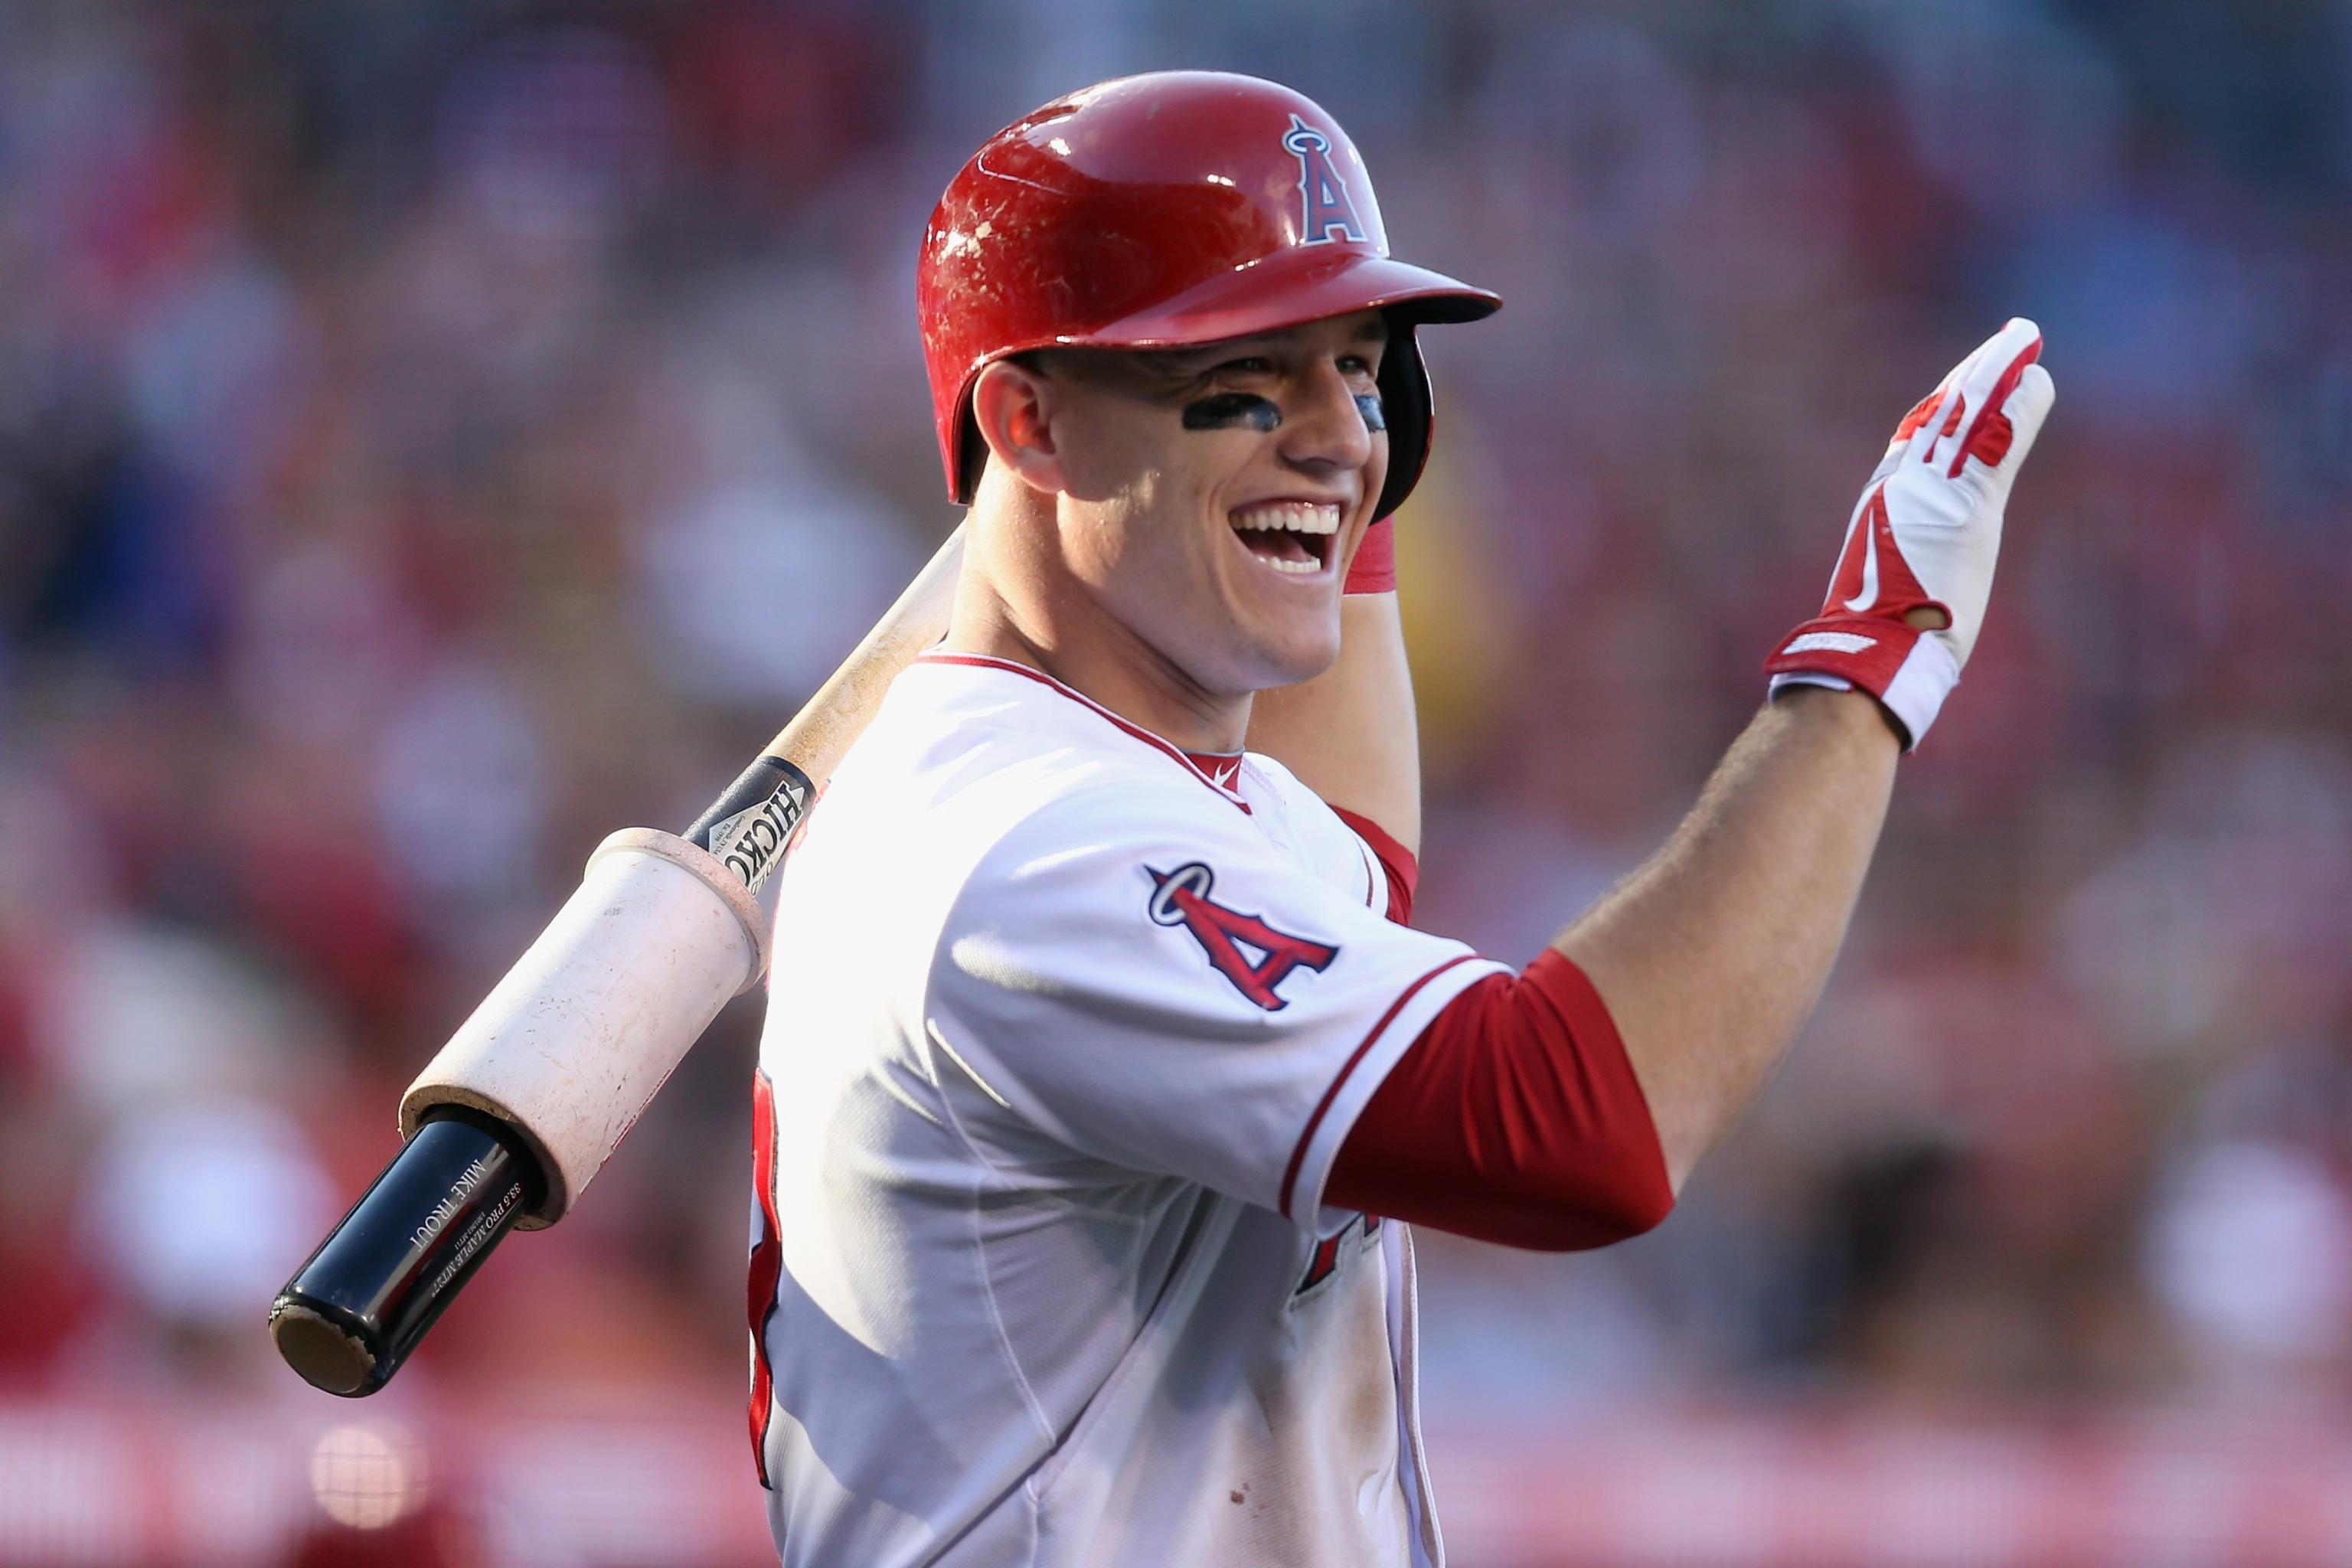 Mike Trout News, Biography, MLB Records, Stats & Facts